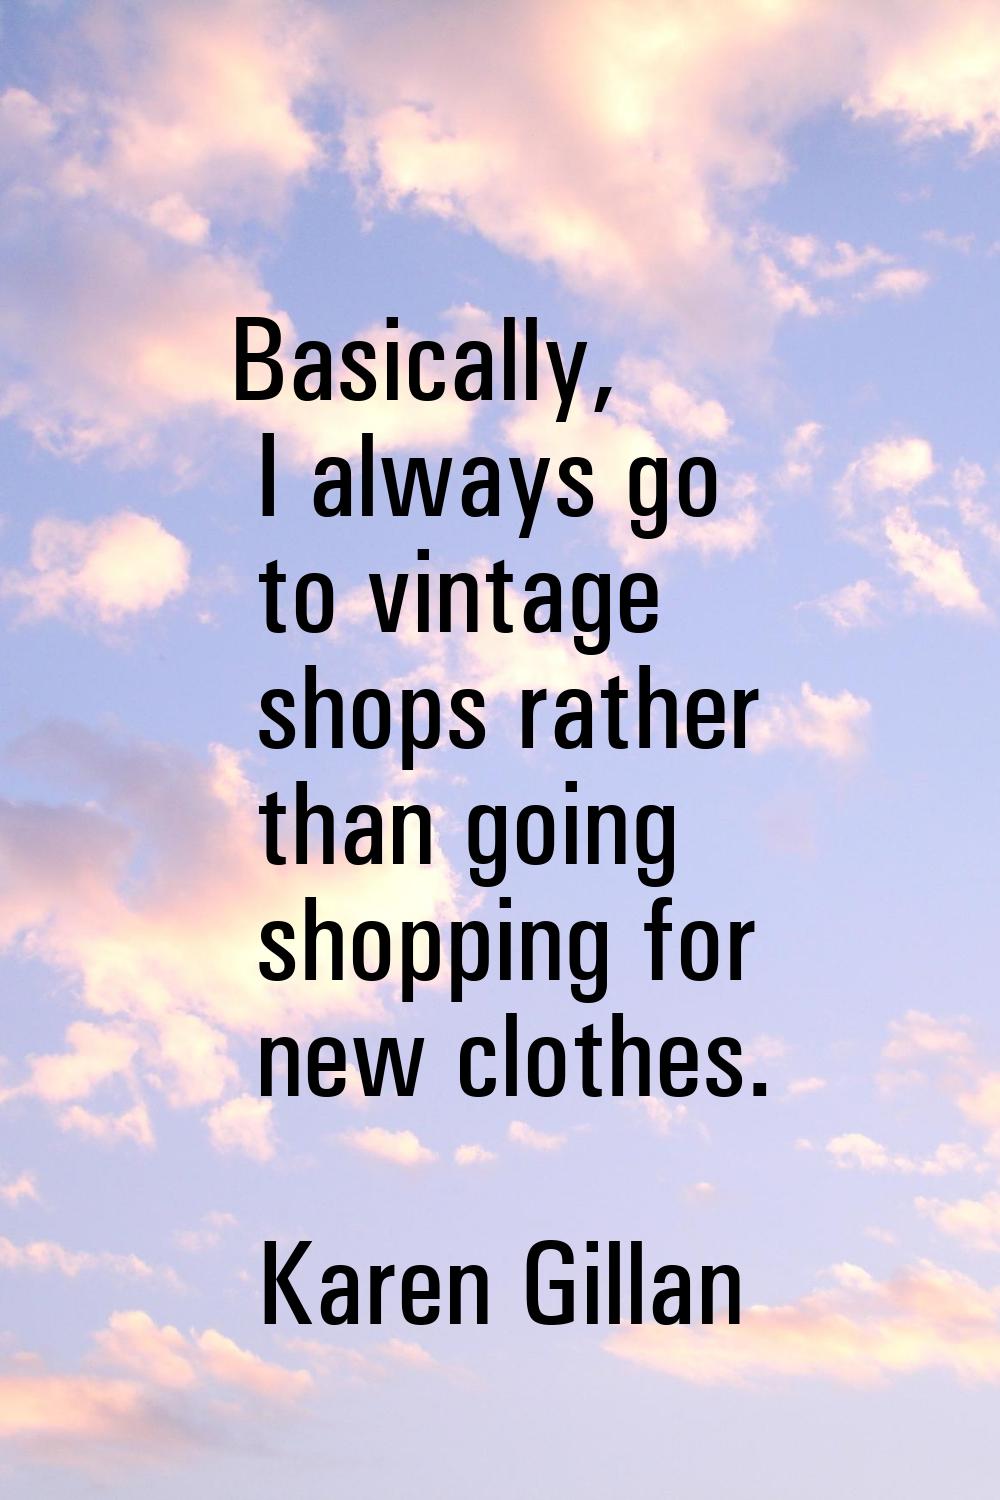 Basically, I always go to vintage shops rather than going shopping for new clothes.